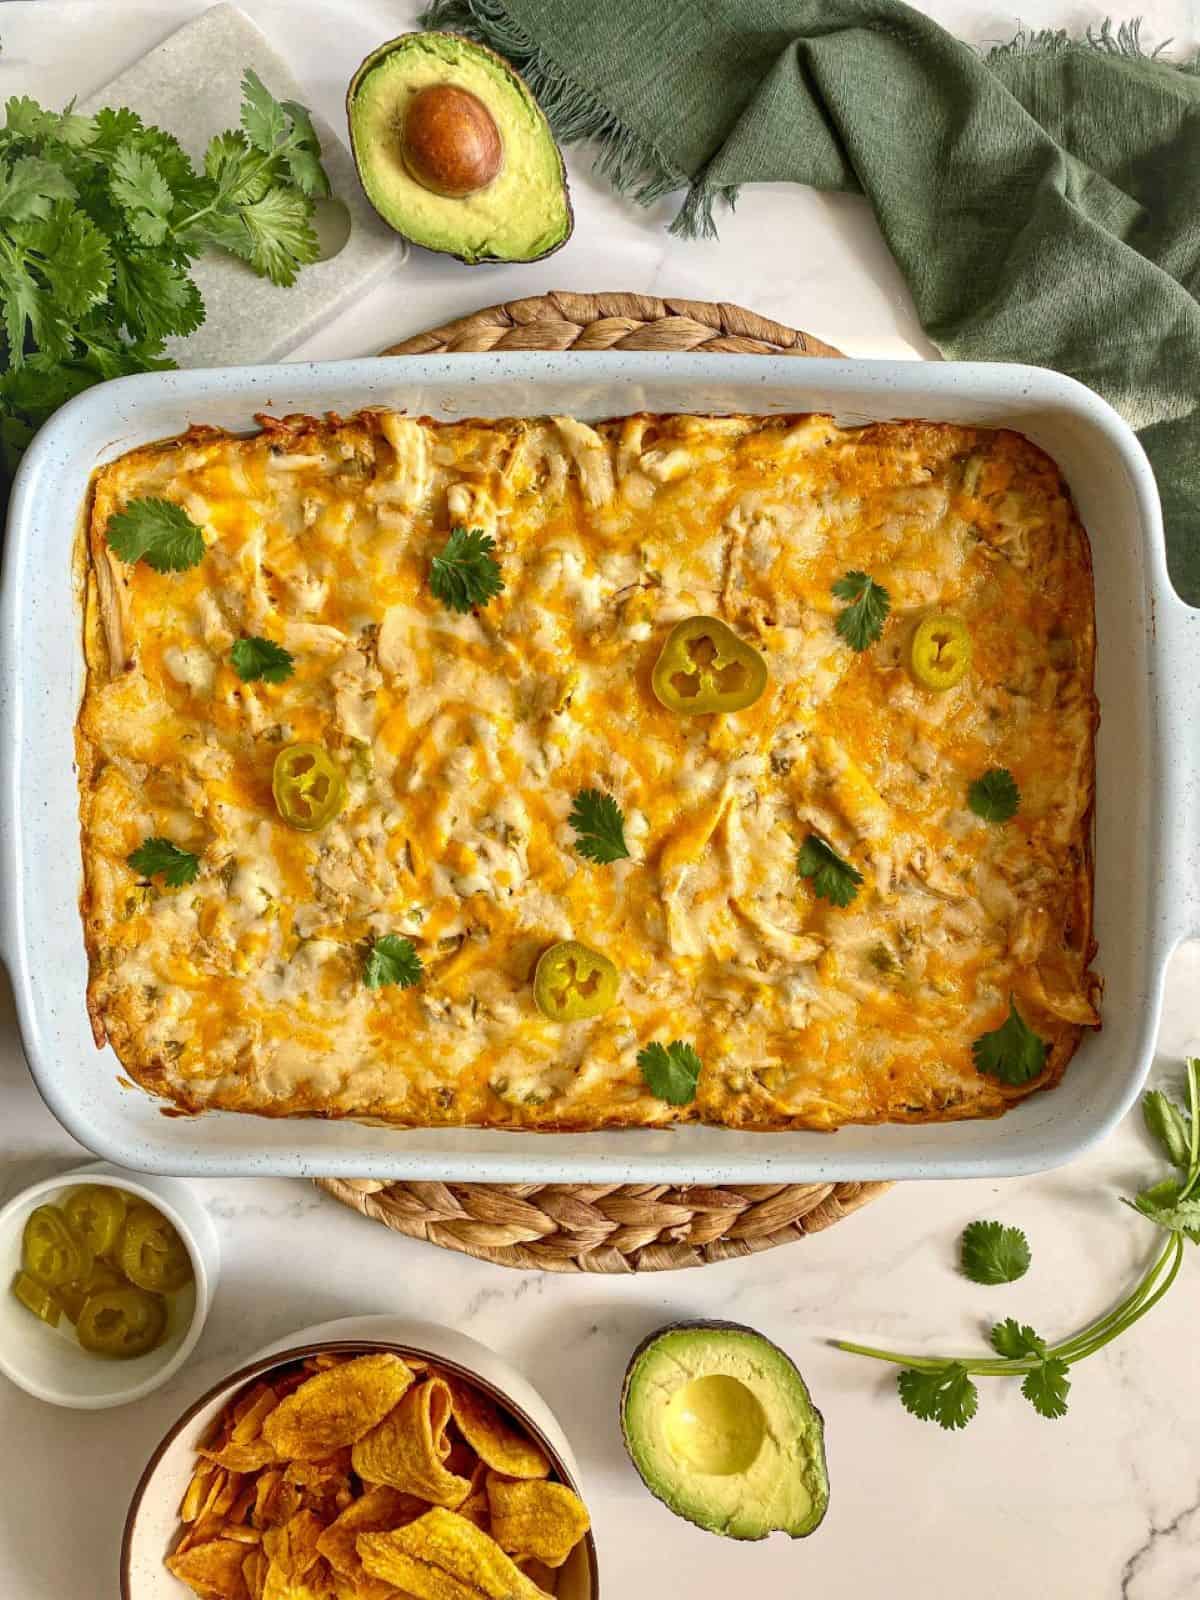 Cooked sour cream chicken enchilada casserole in a baking dish with chips and avocado on the side.